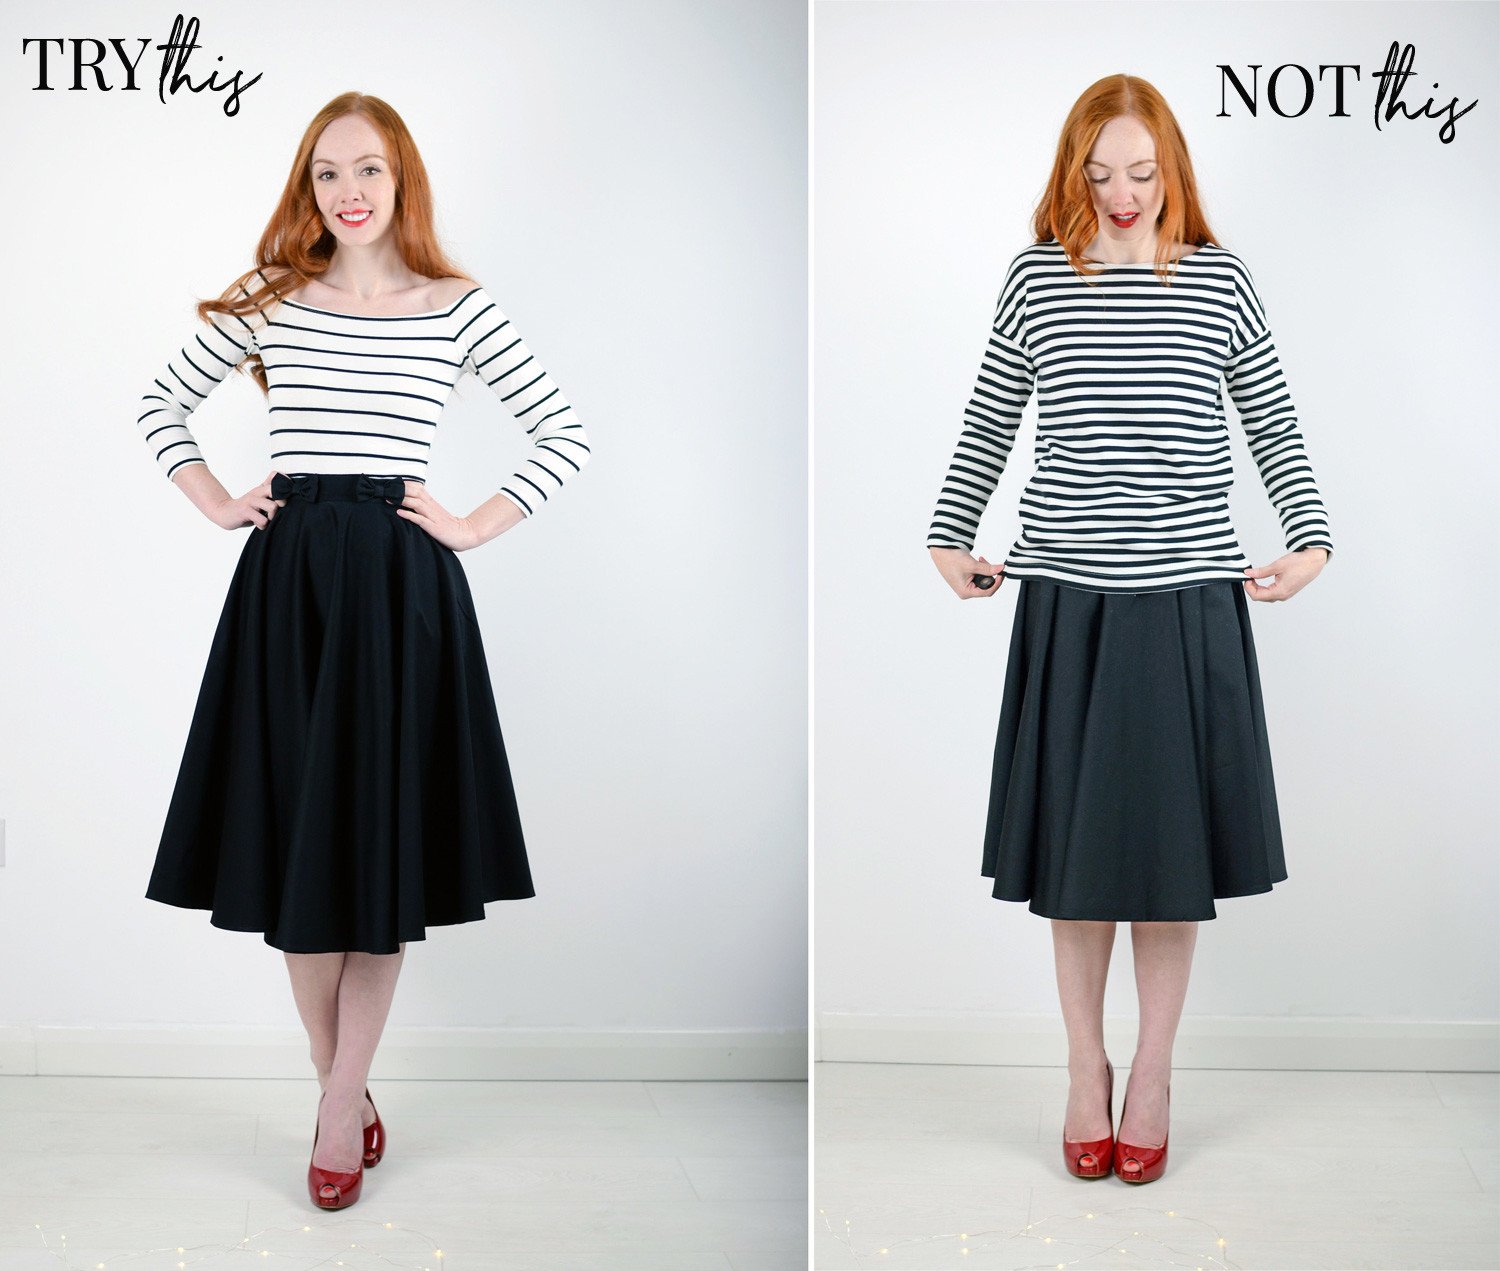 How Do You Wear A Midi Skirt Without Looking Frumpy?